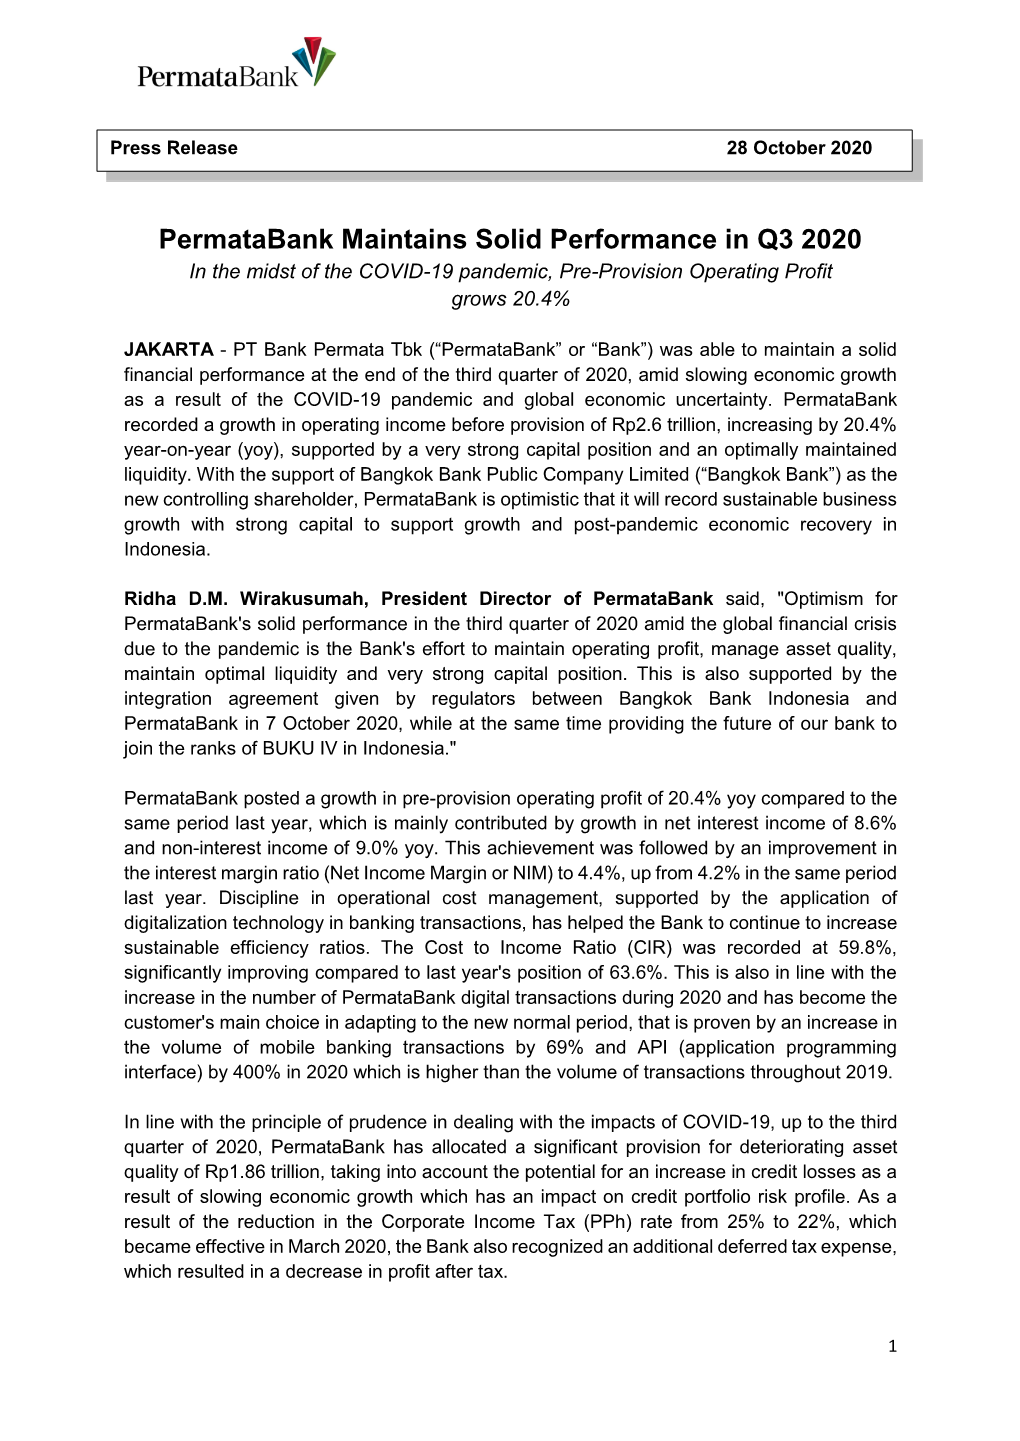 Permatabank Maintains Solid Performance in Q3 2020 in the Midst of the COVID-19 Pandemic, Pre-Provision Operating Profit Grows 20.4%